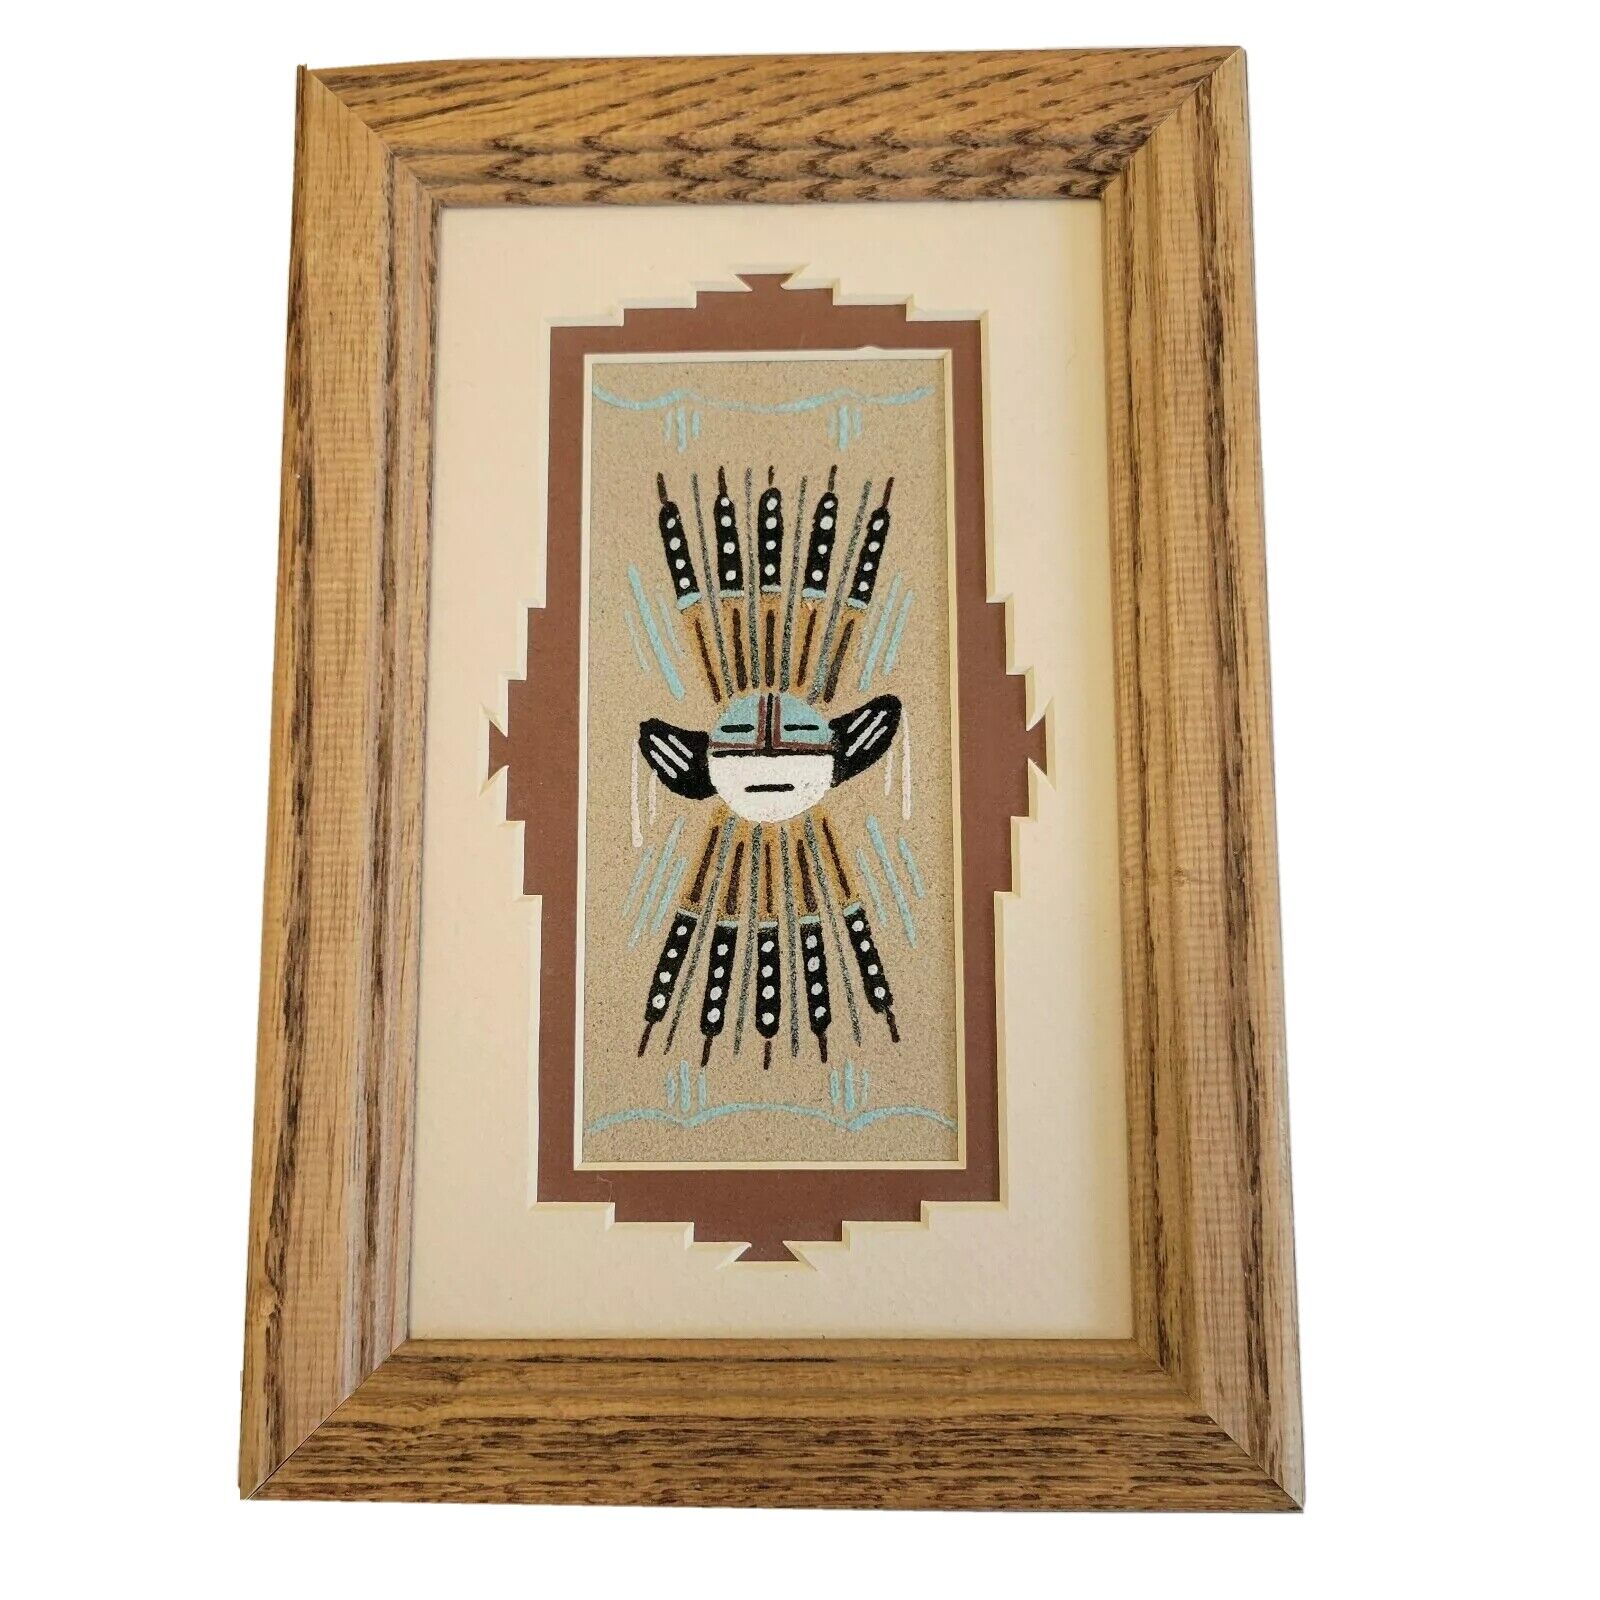 Navajo-crafted traditional Sand Painting featuring the life-giving Sun Signed 